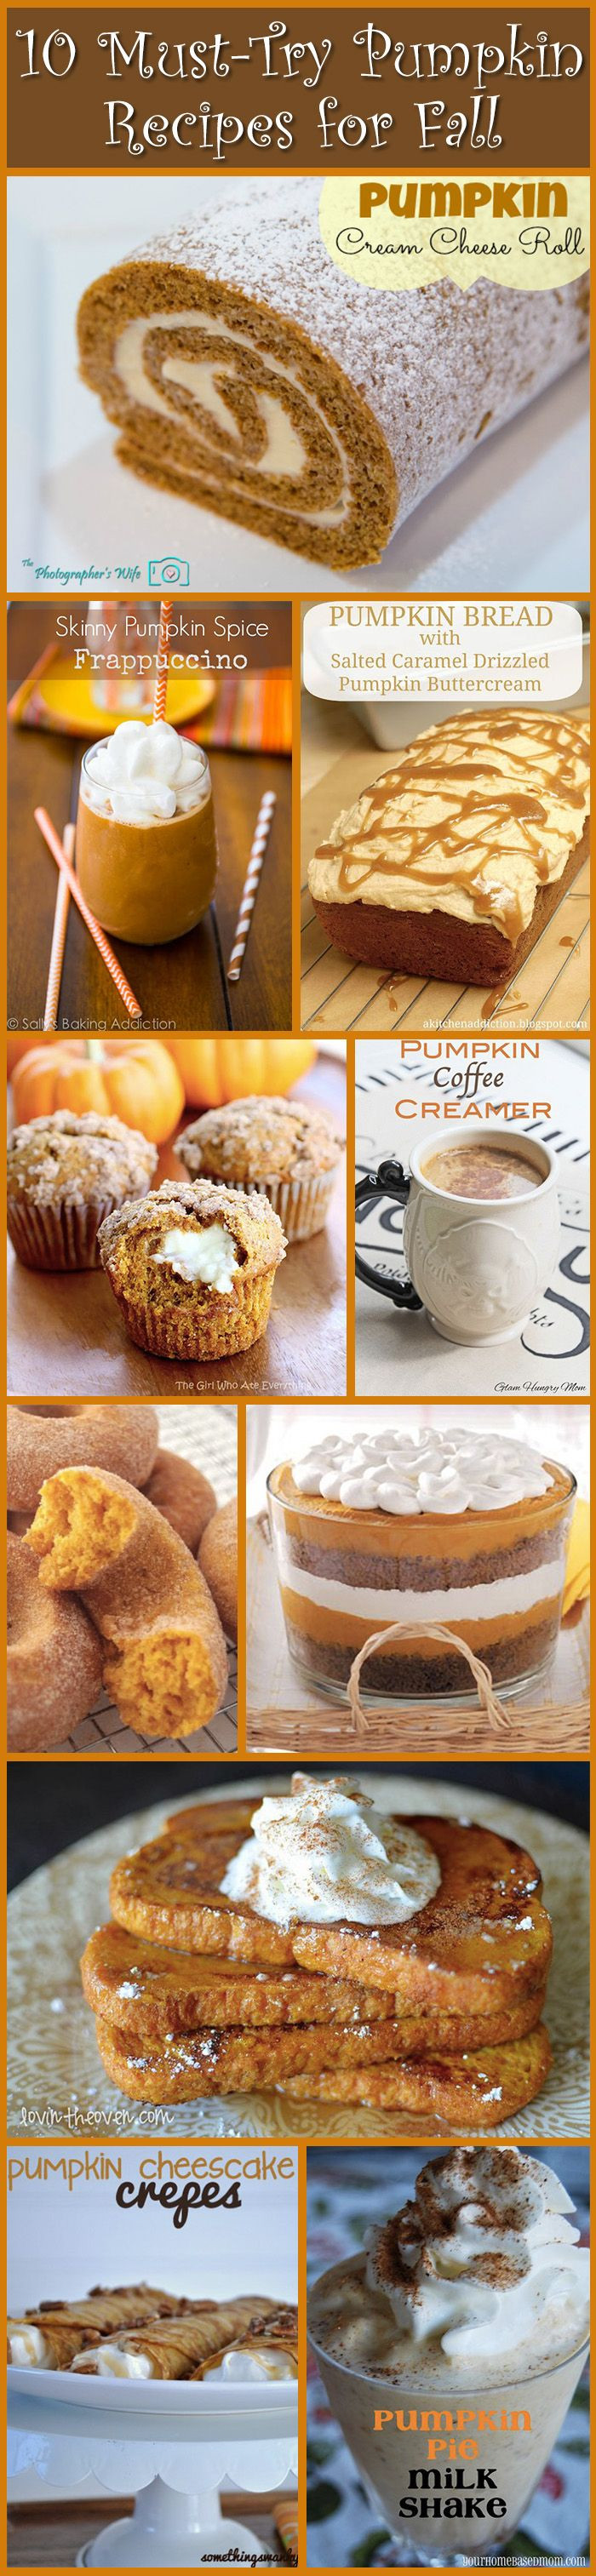 Fall Desserts 2019
 10 MUST TRY pumpkin recipes for Fall